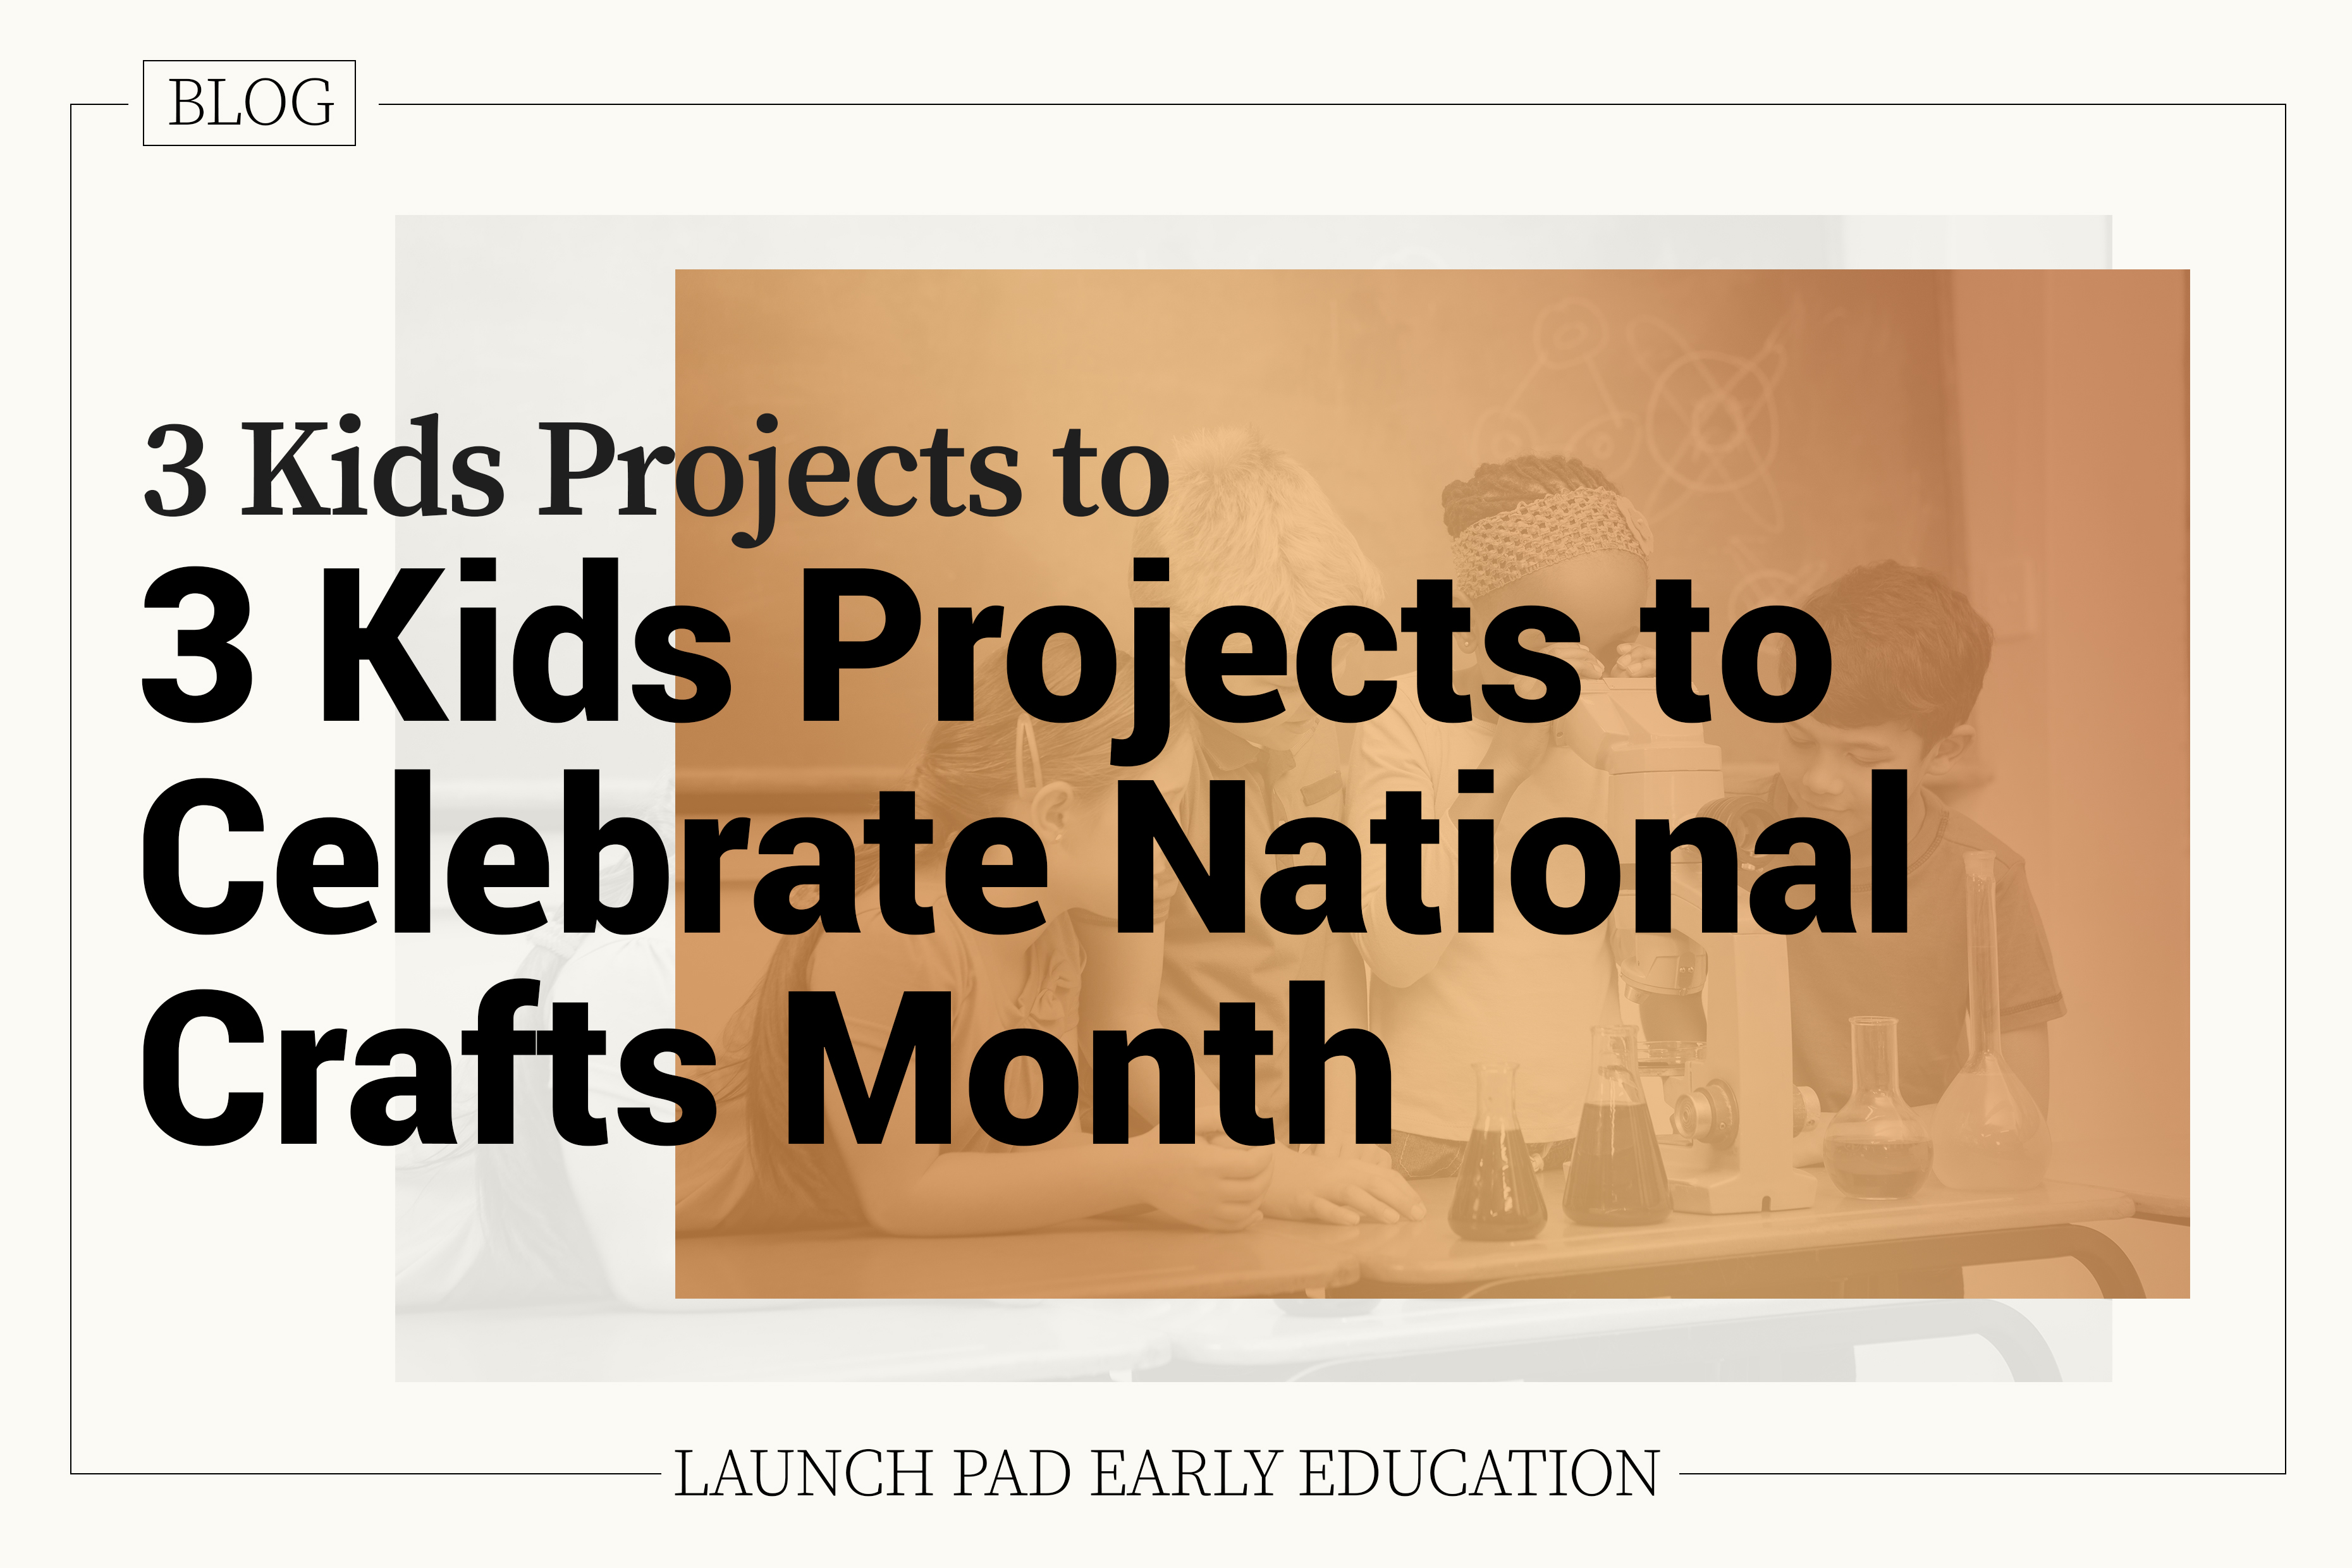 3 Kids Project to Celebrate National Crafts Month